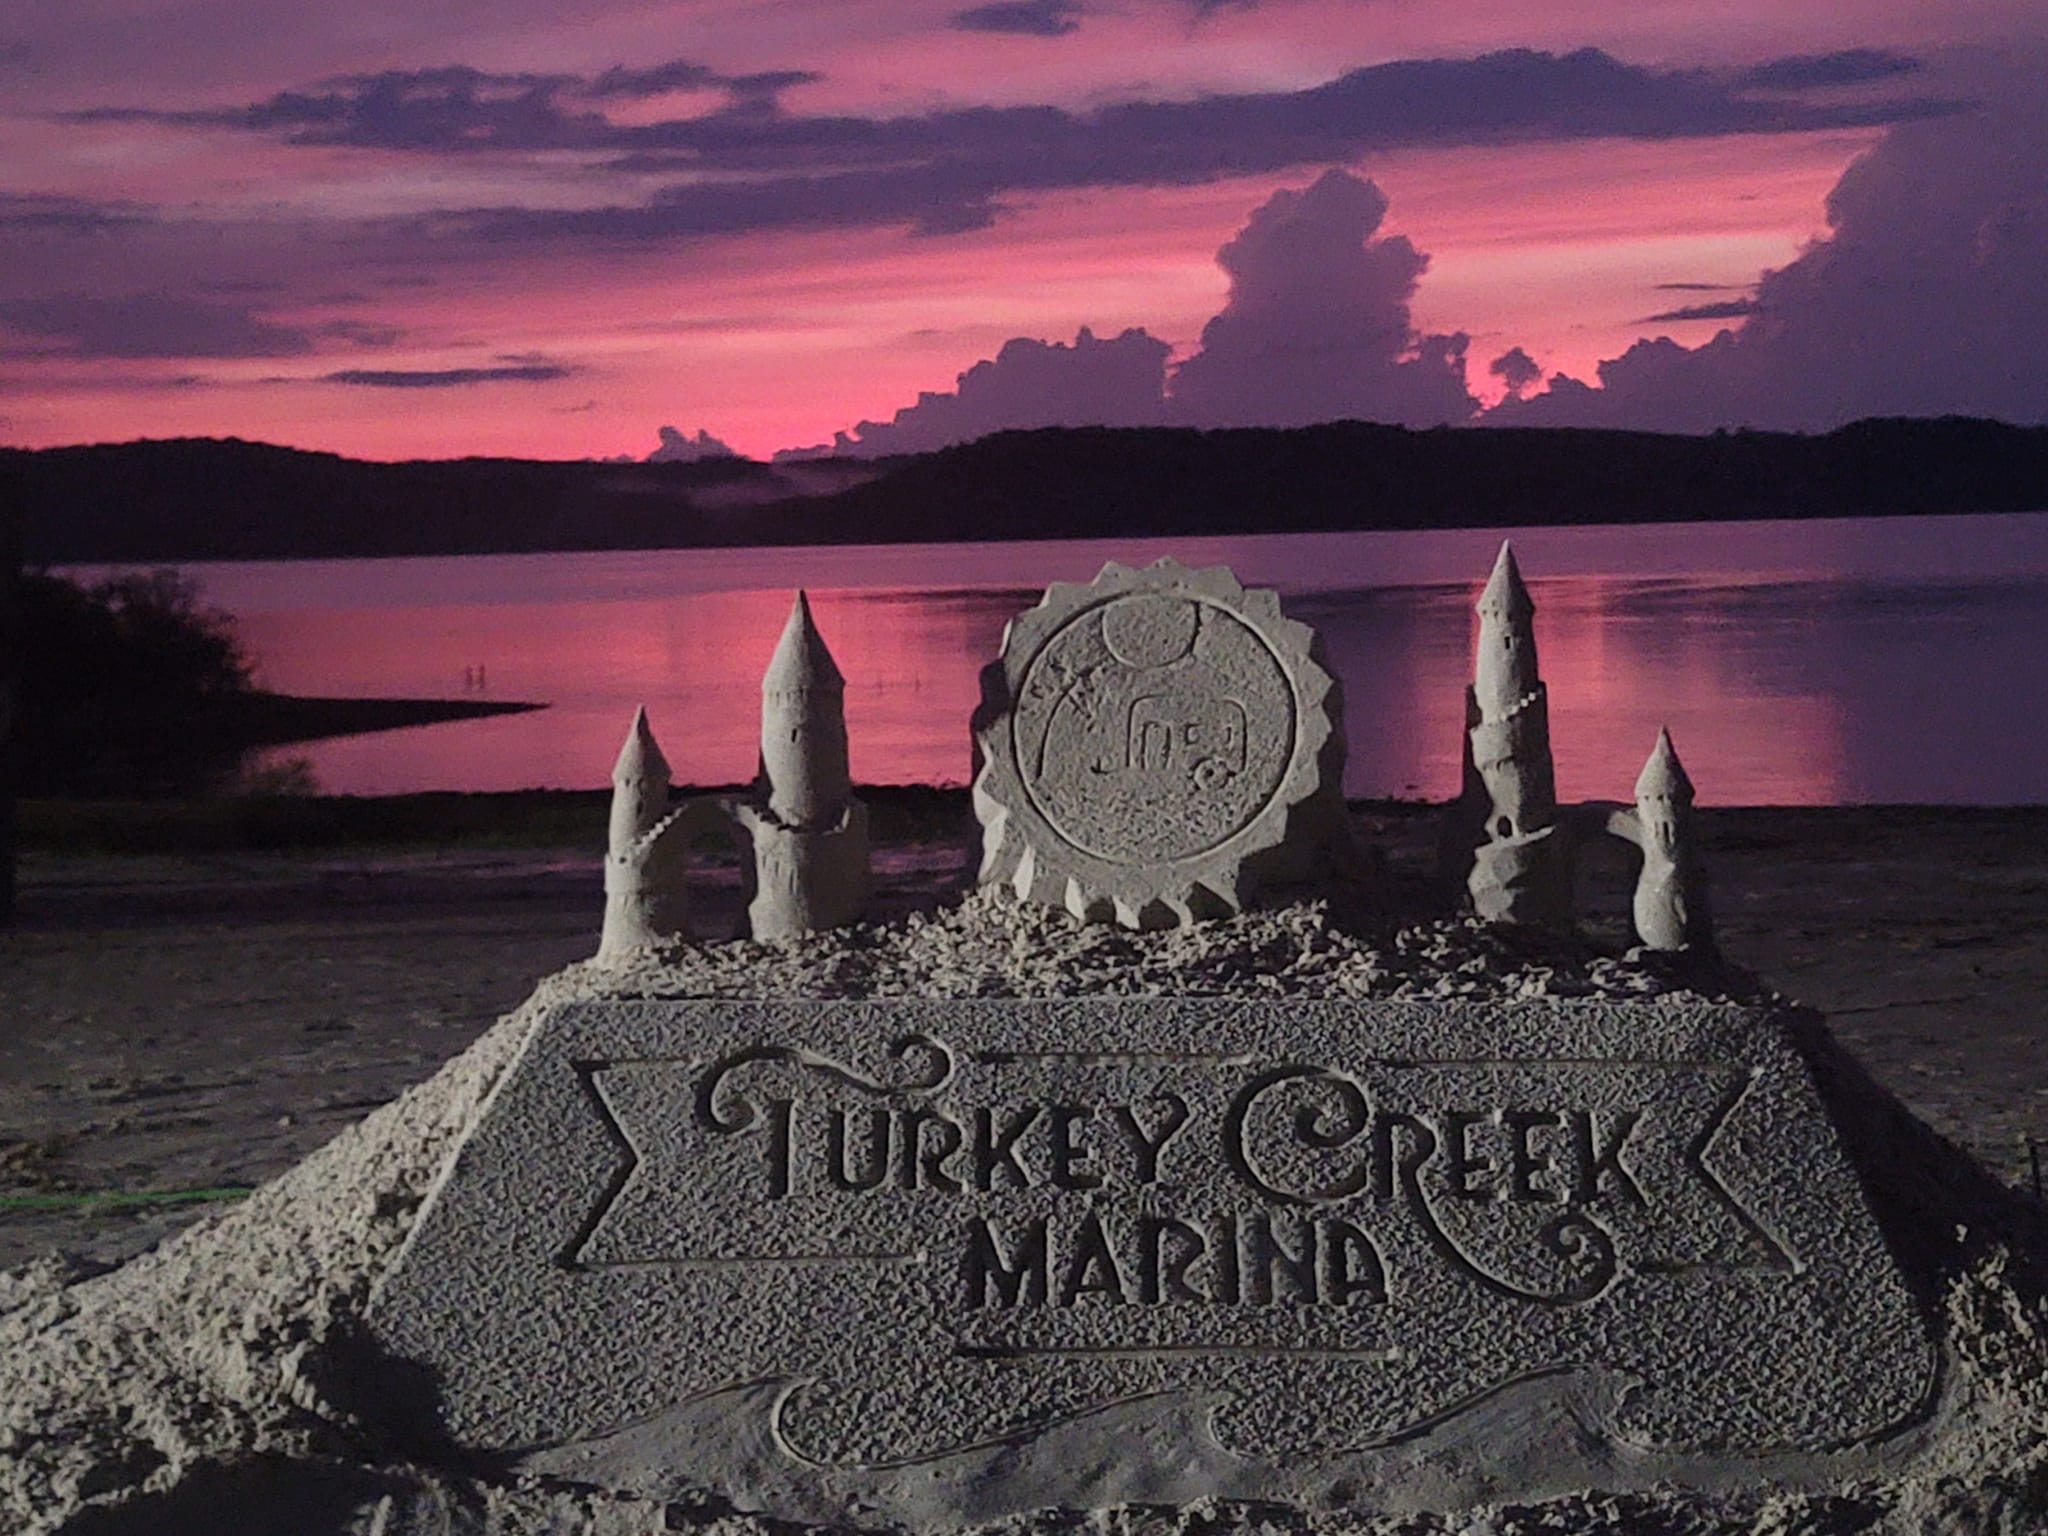 Sand castle on a lake shore with Turkey Creek Marina written on the front